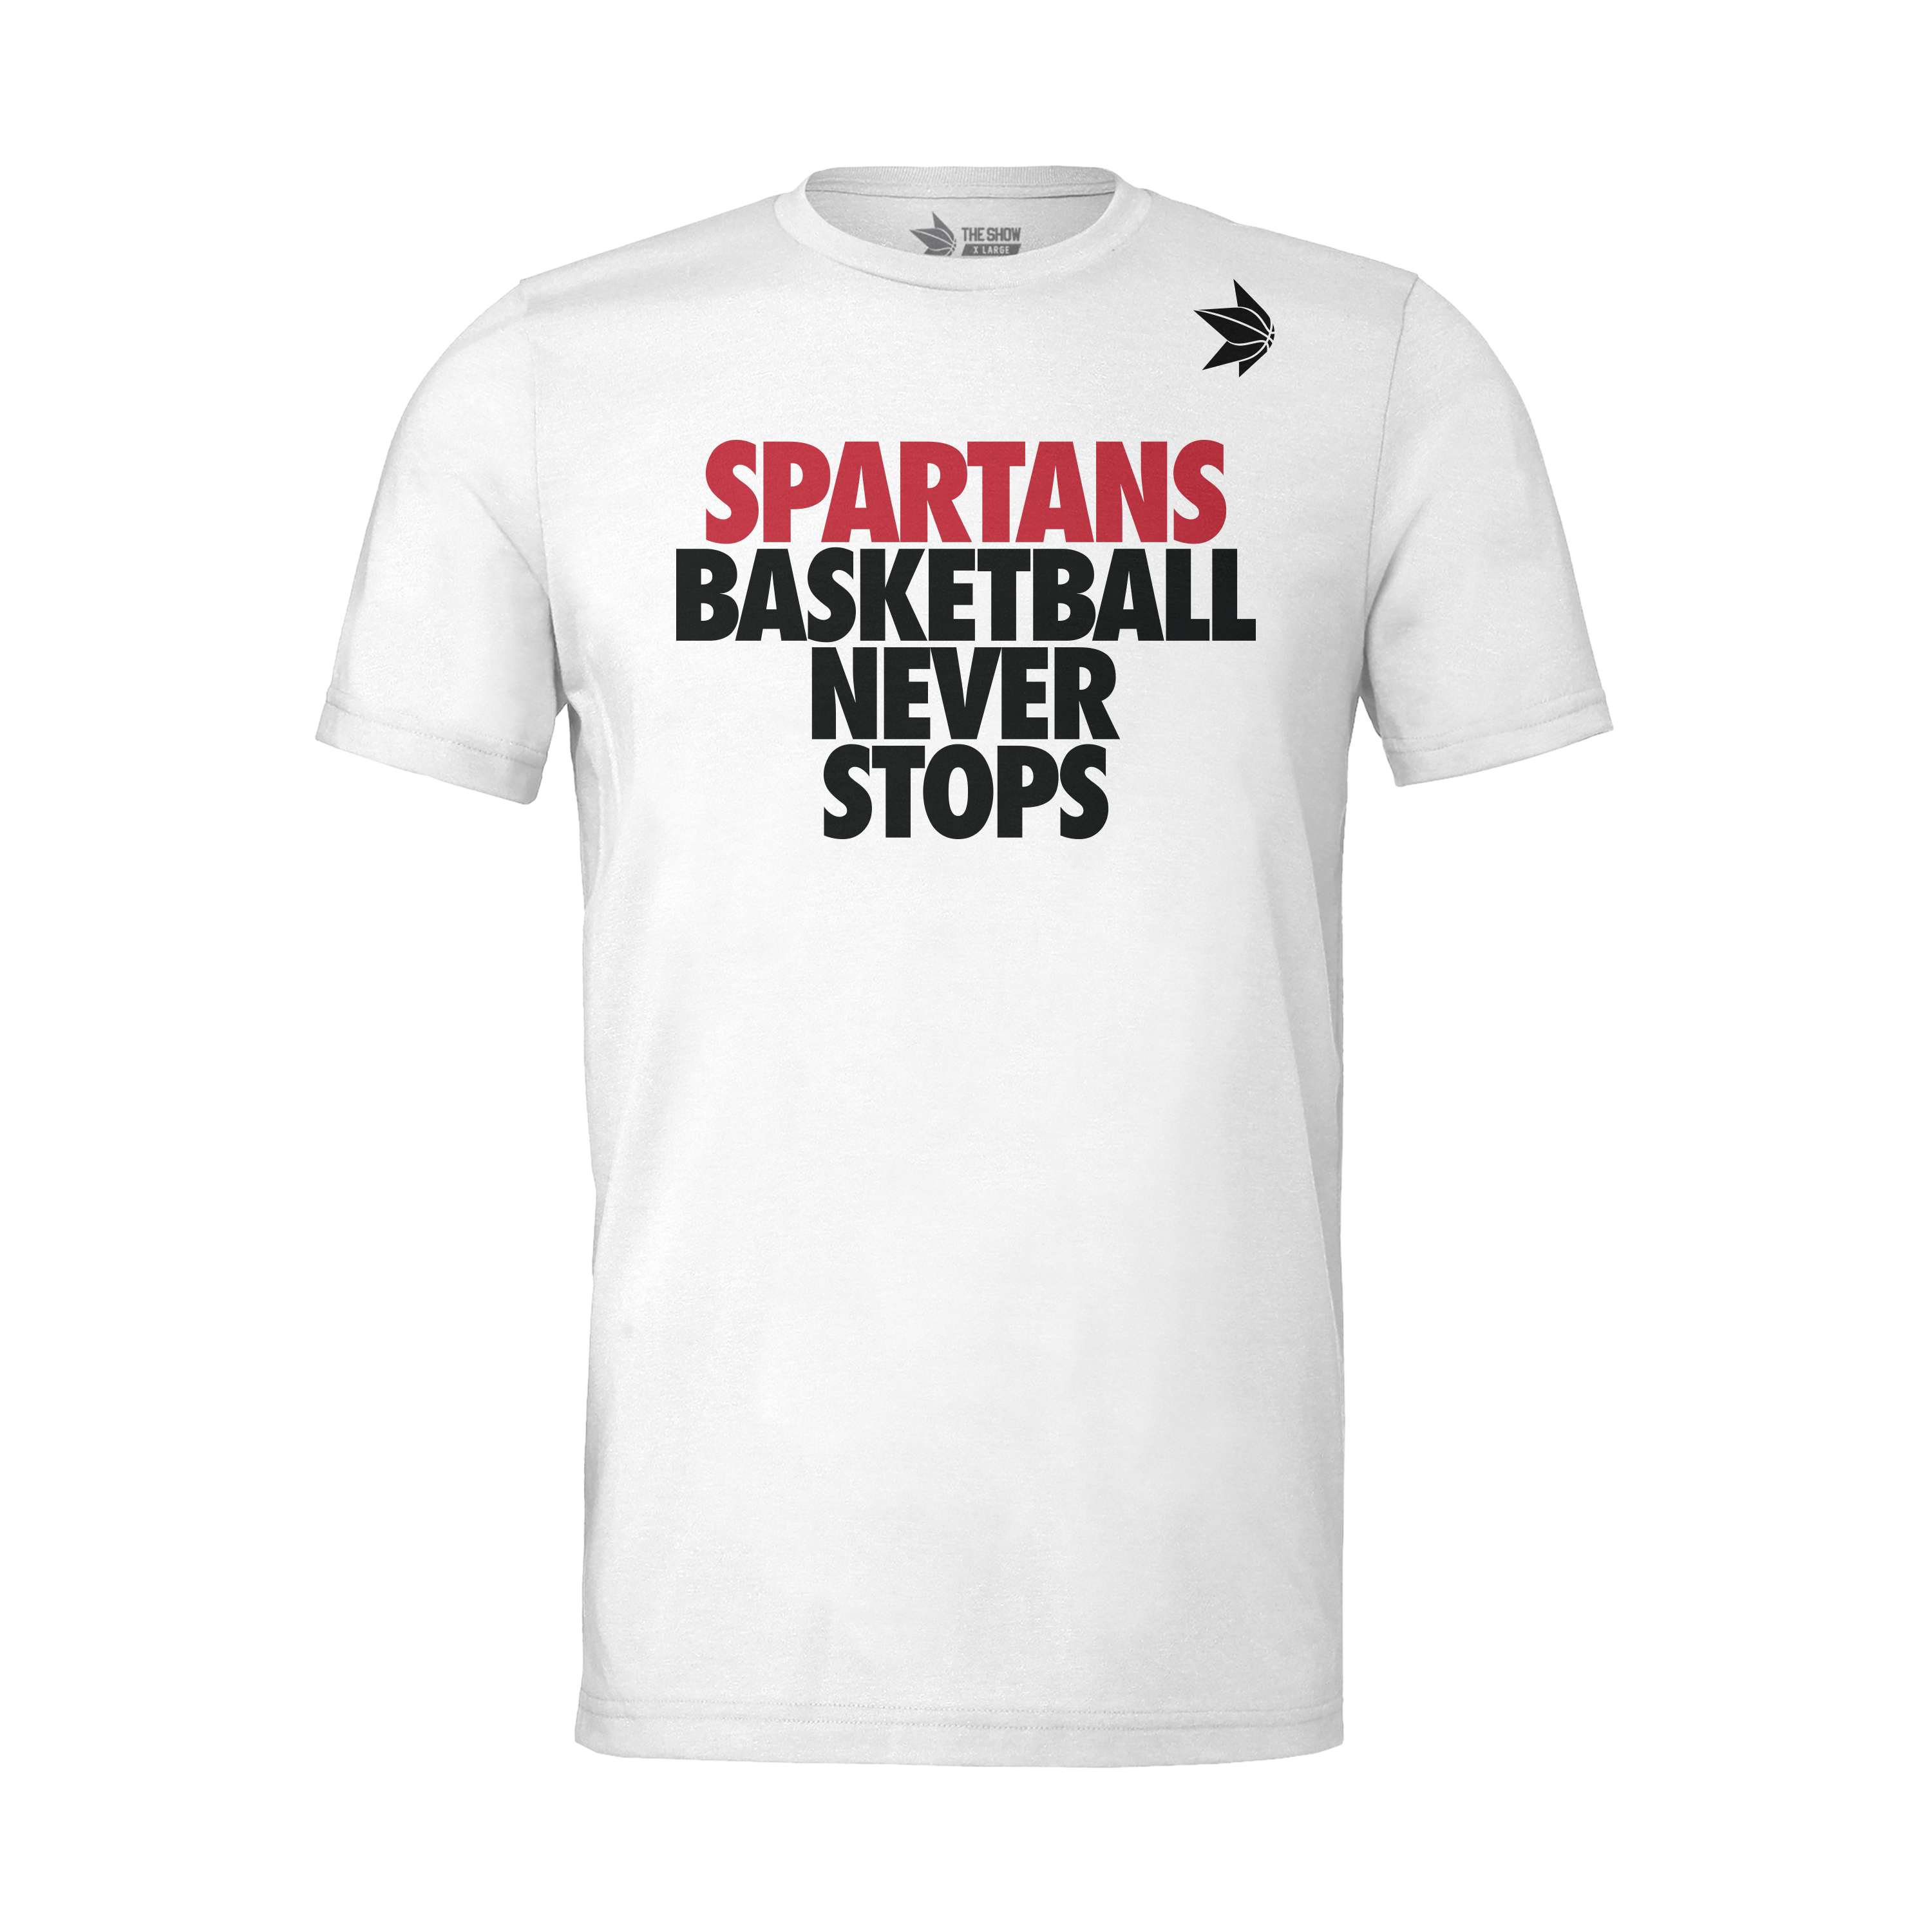 Spartans Never Stops - White - The Show Basketball